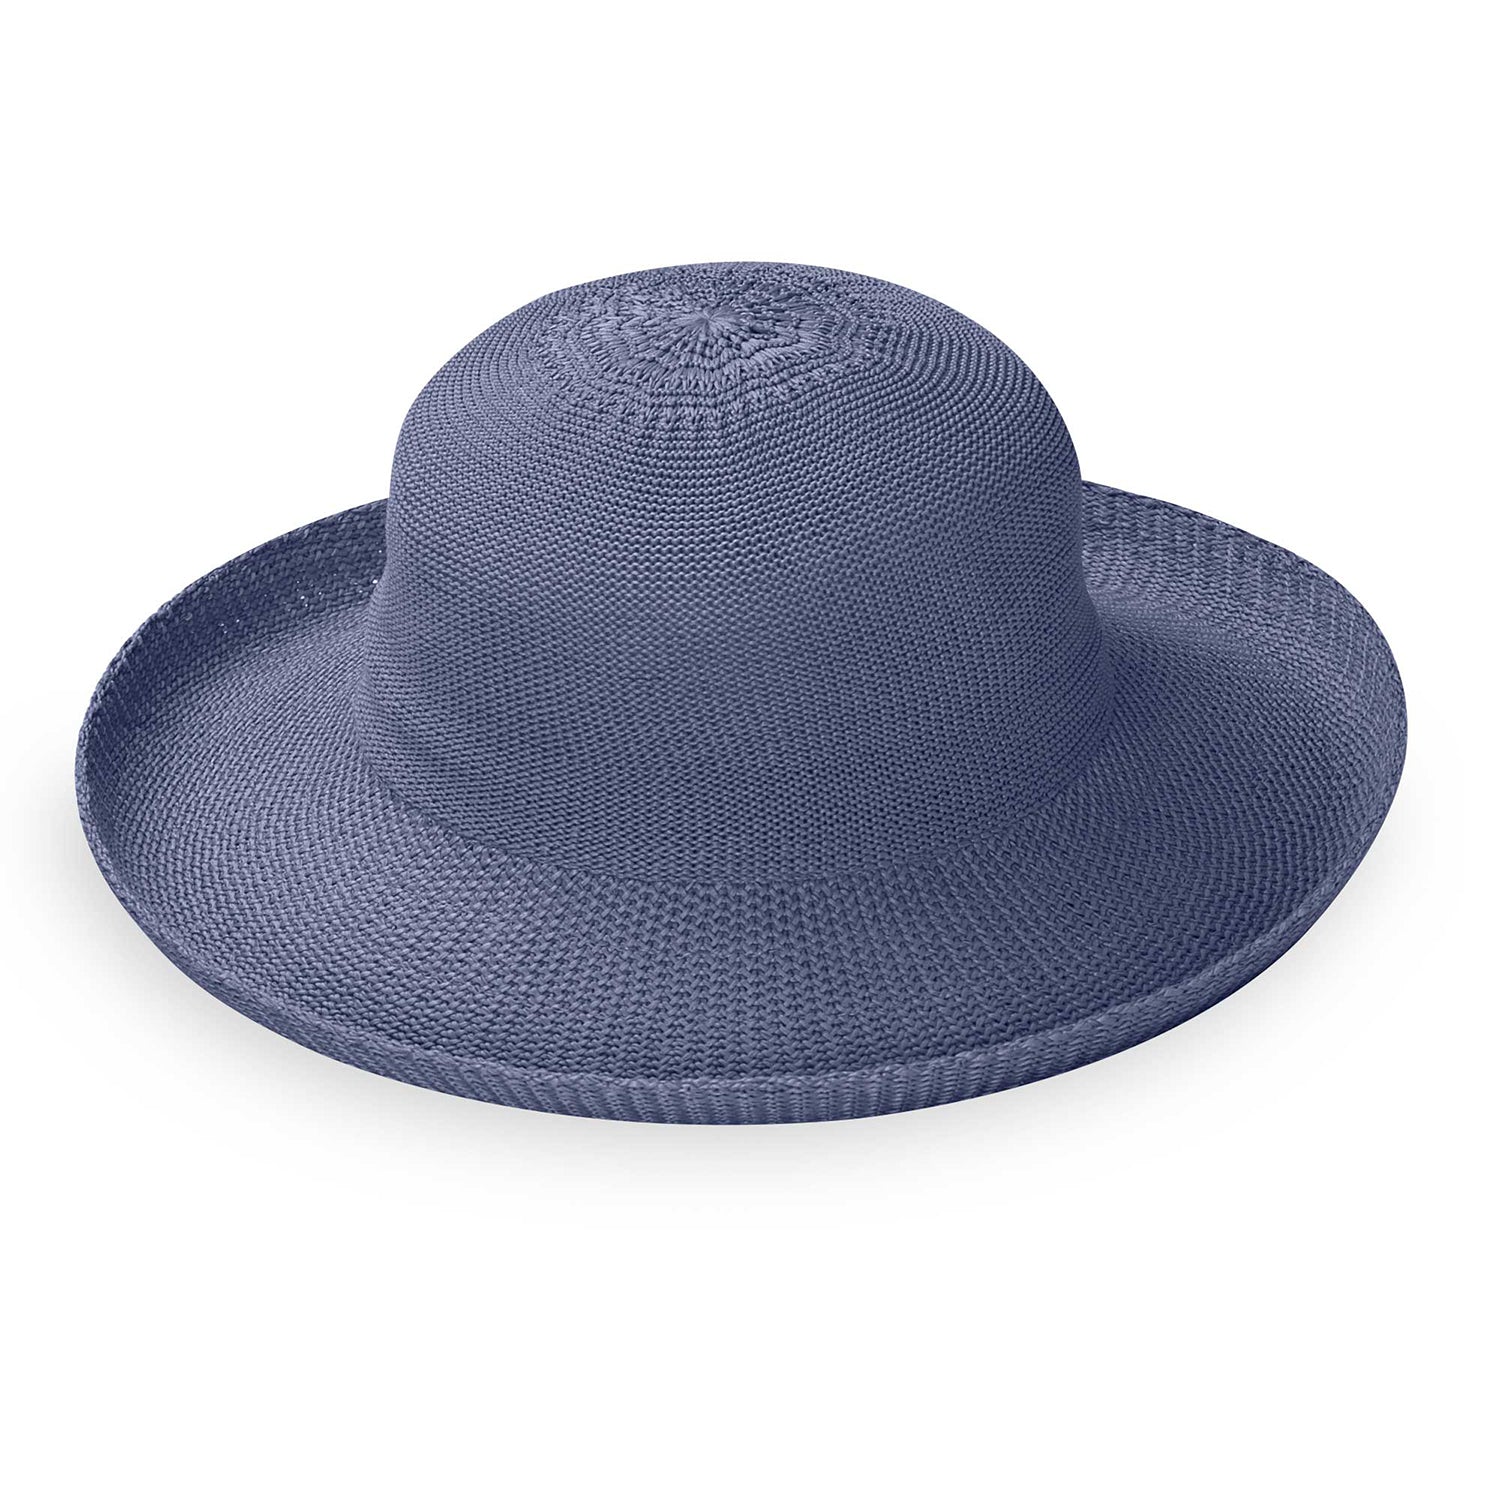 Featuring women's victoria sun hat by wallaroo with upturned brim